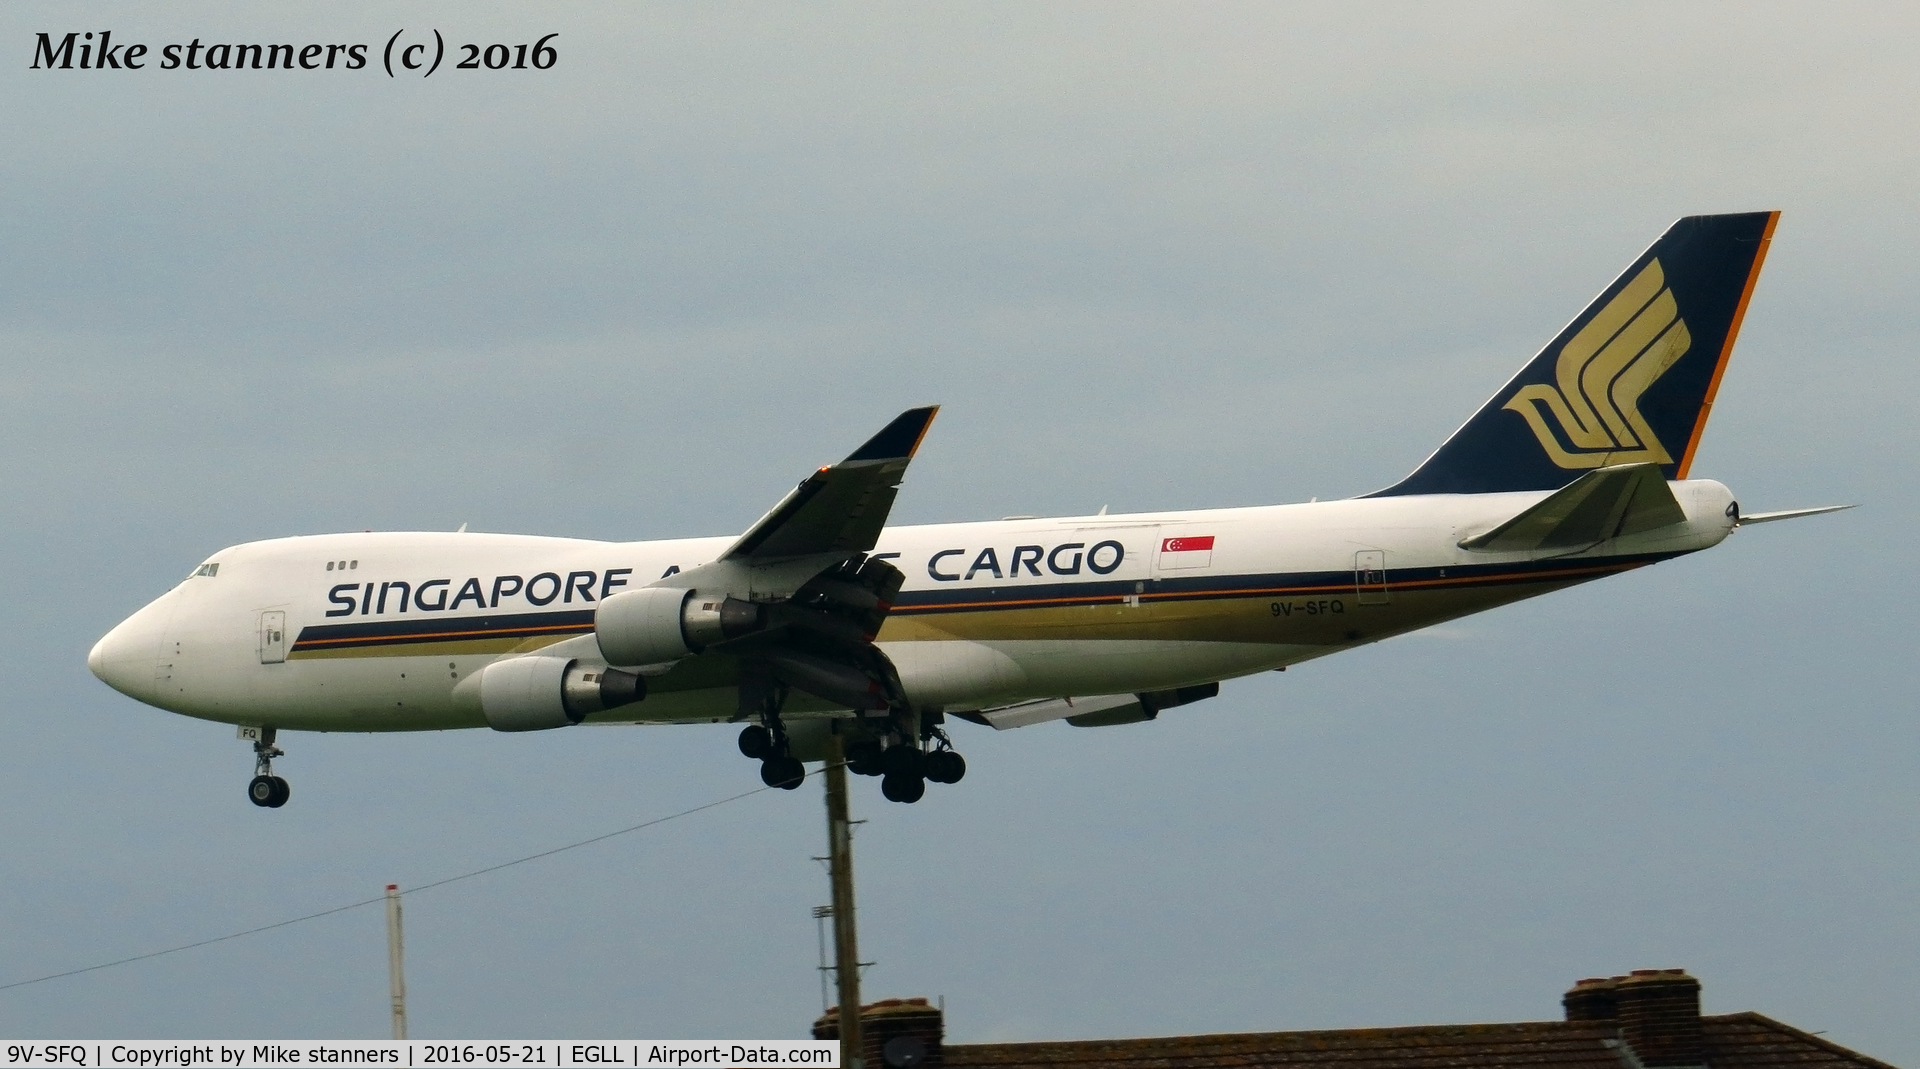 9V-SFQ, 2006 Boeing 747-412F(SCD) C/N 32901, Singapore Airlines Cargo B747- 412F  landing runway 27L from AUH,LHR 21.5.16